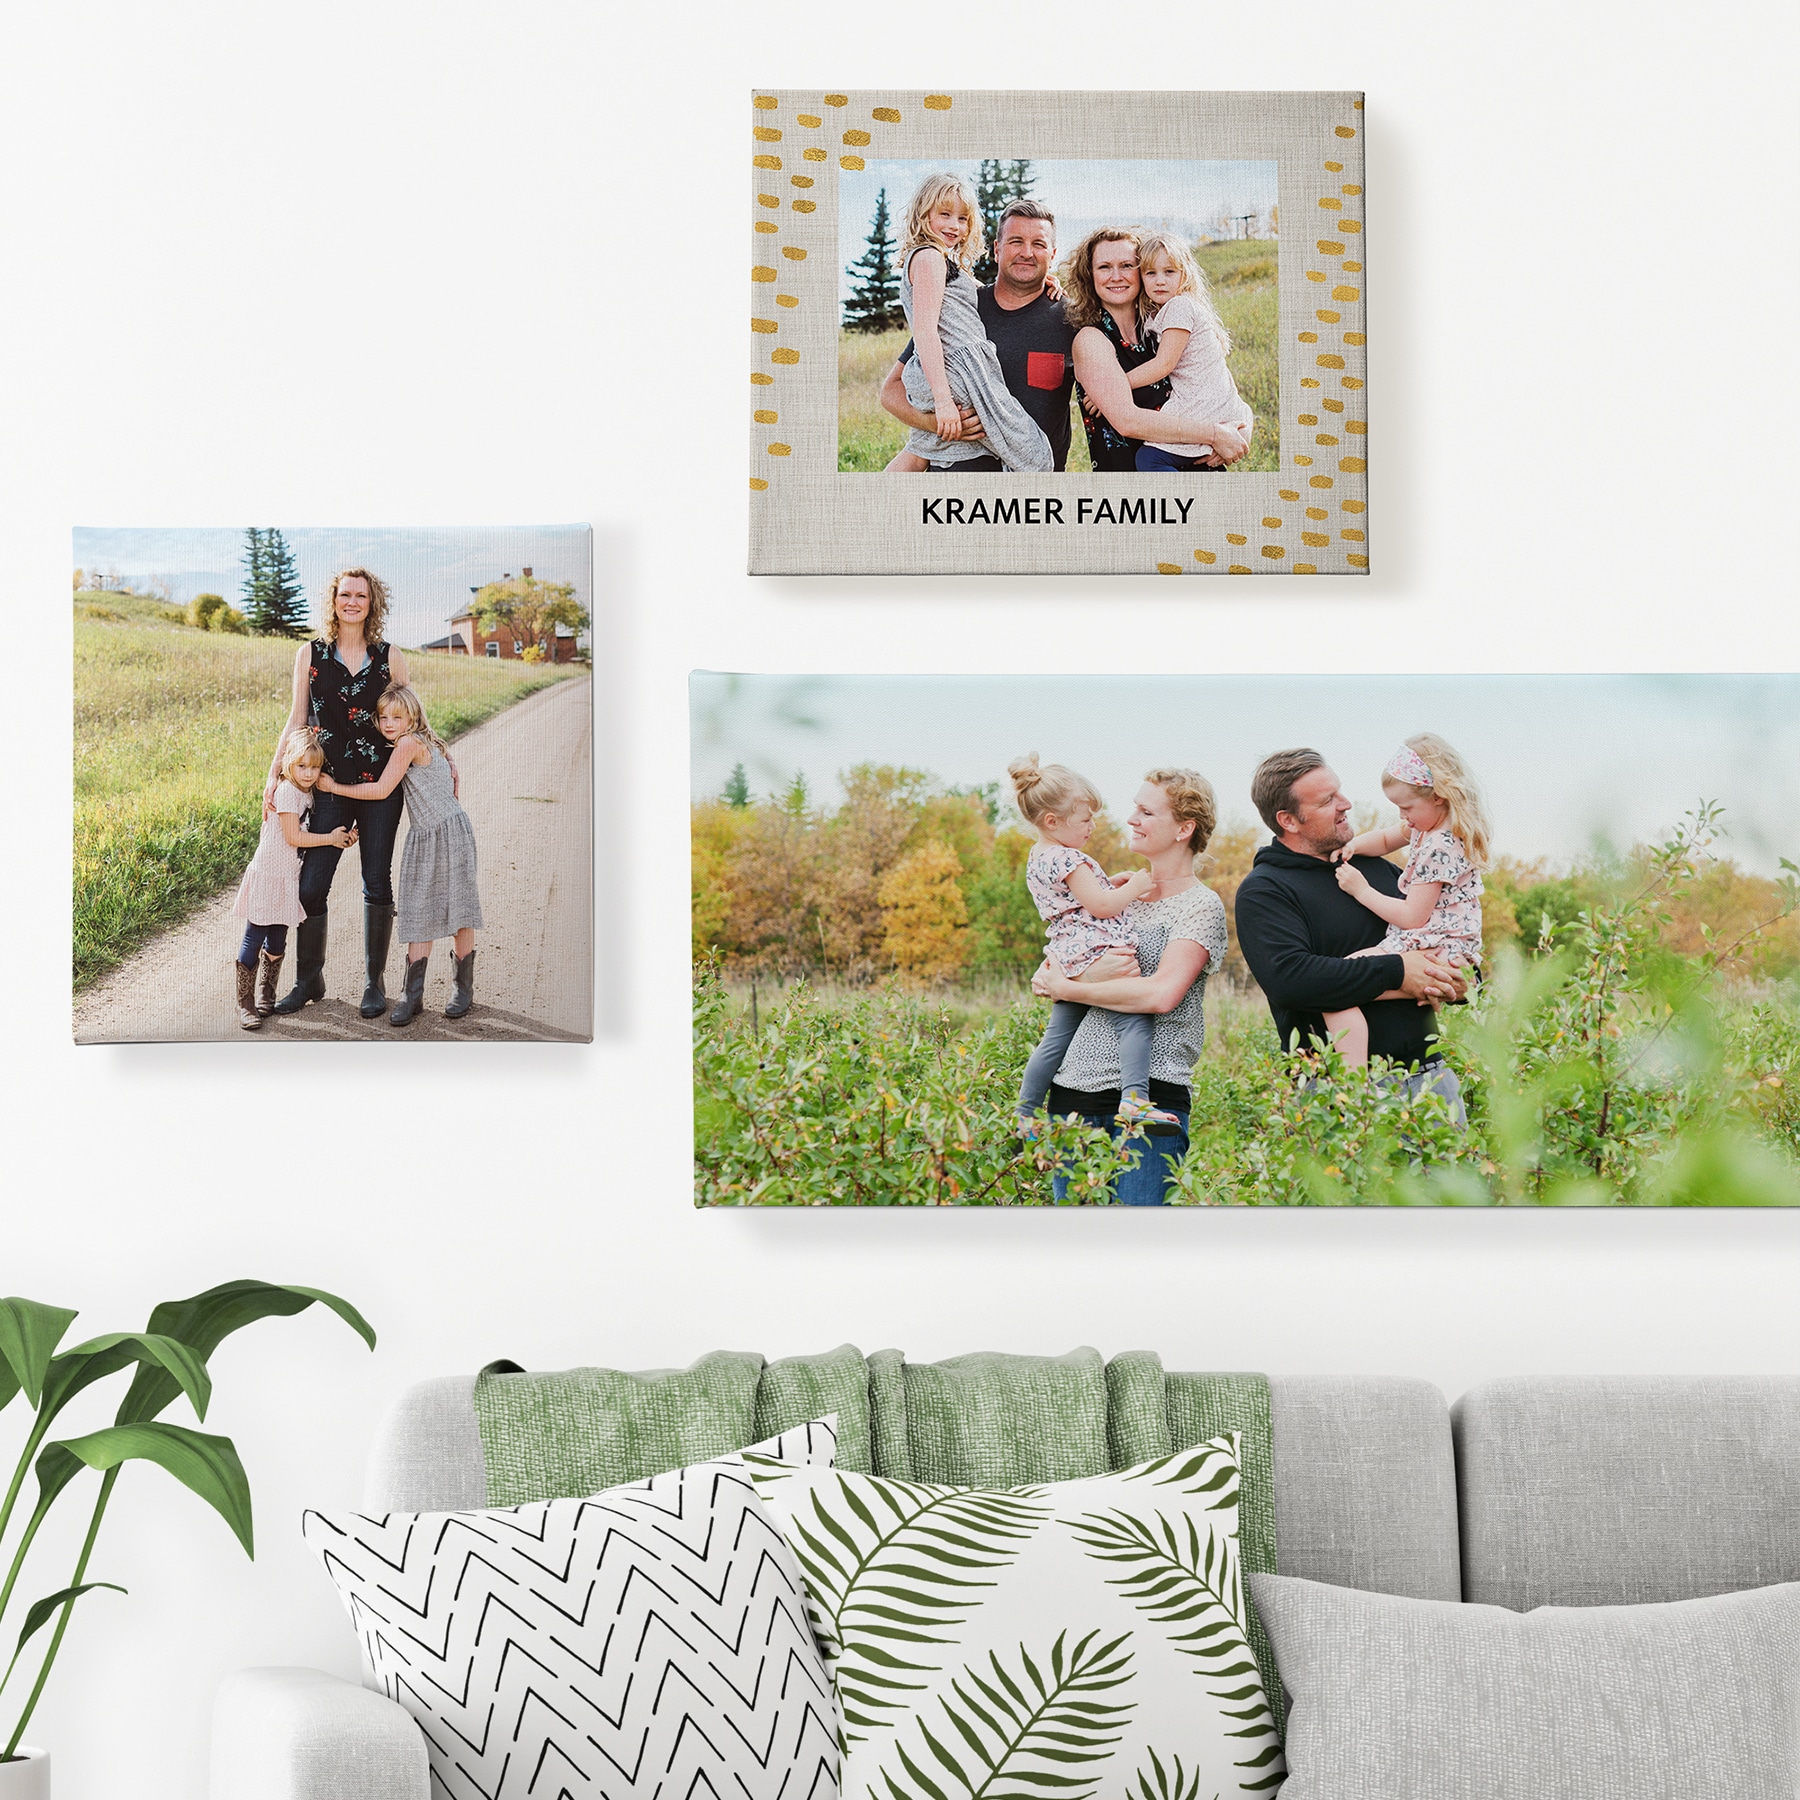 Update your home this Spring with personalized home décor